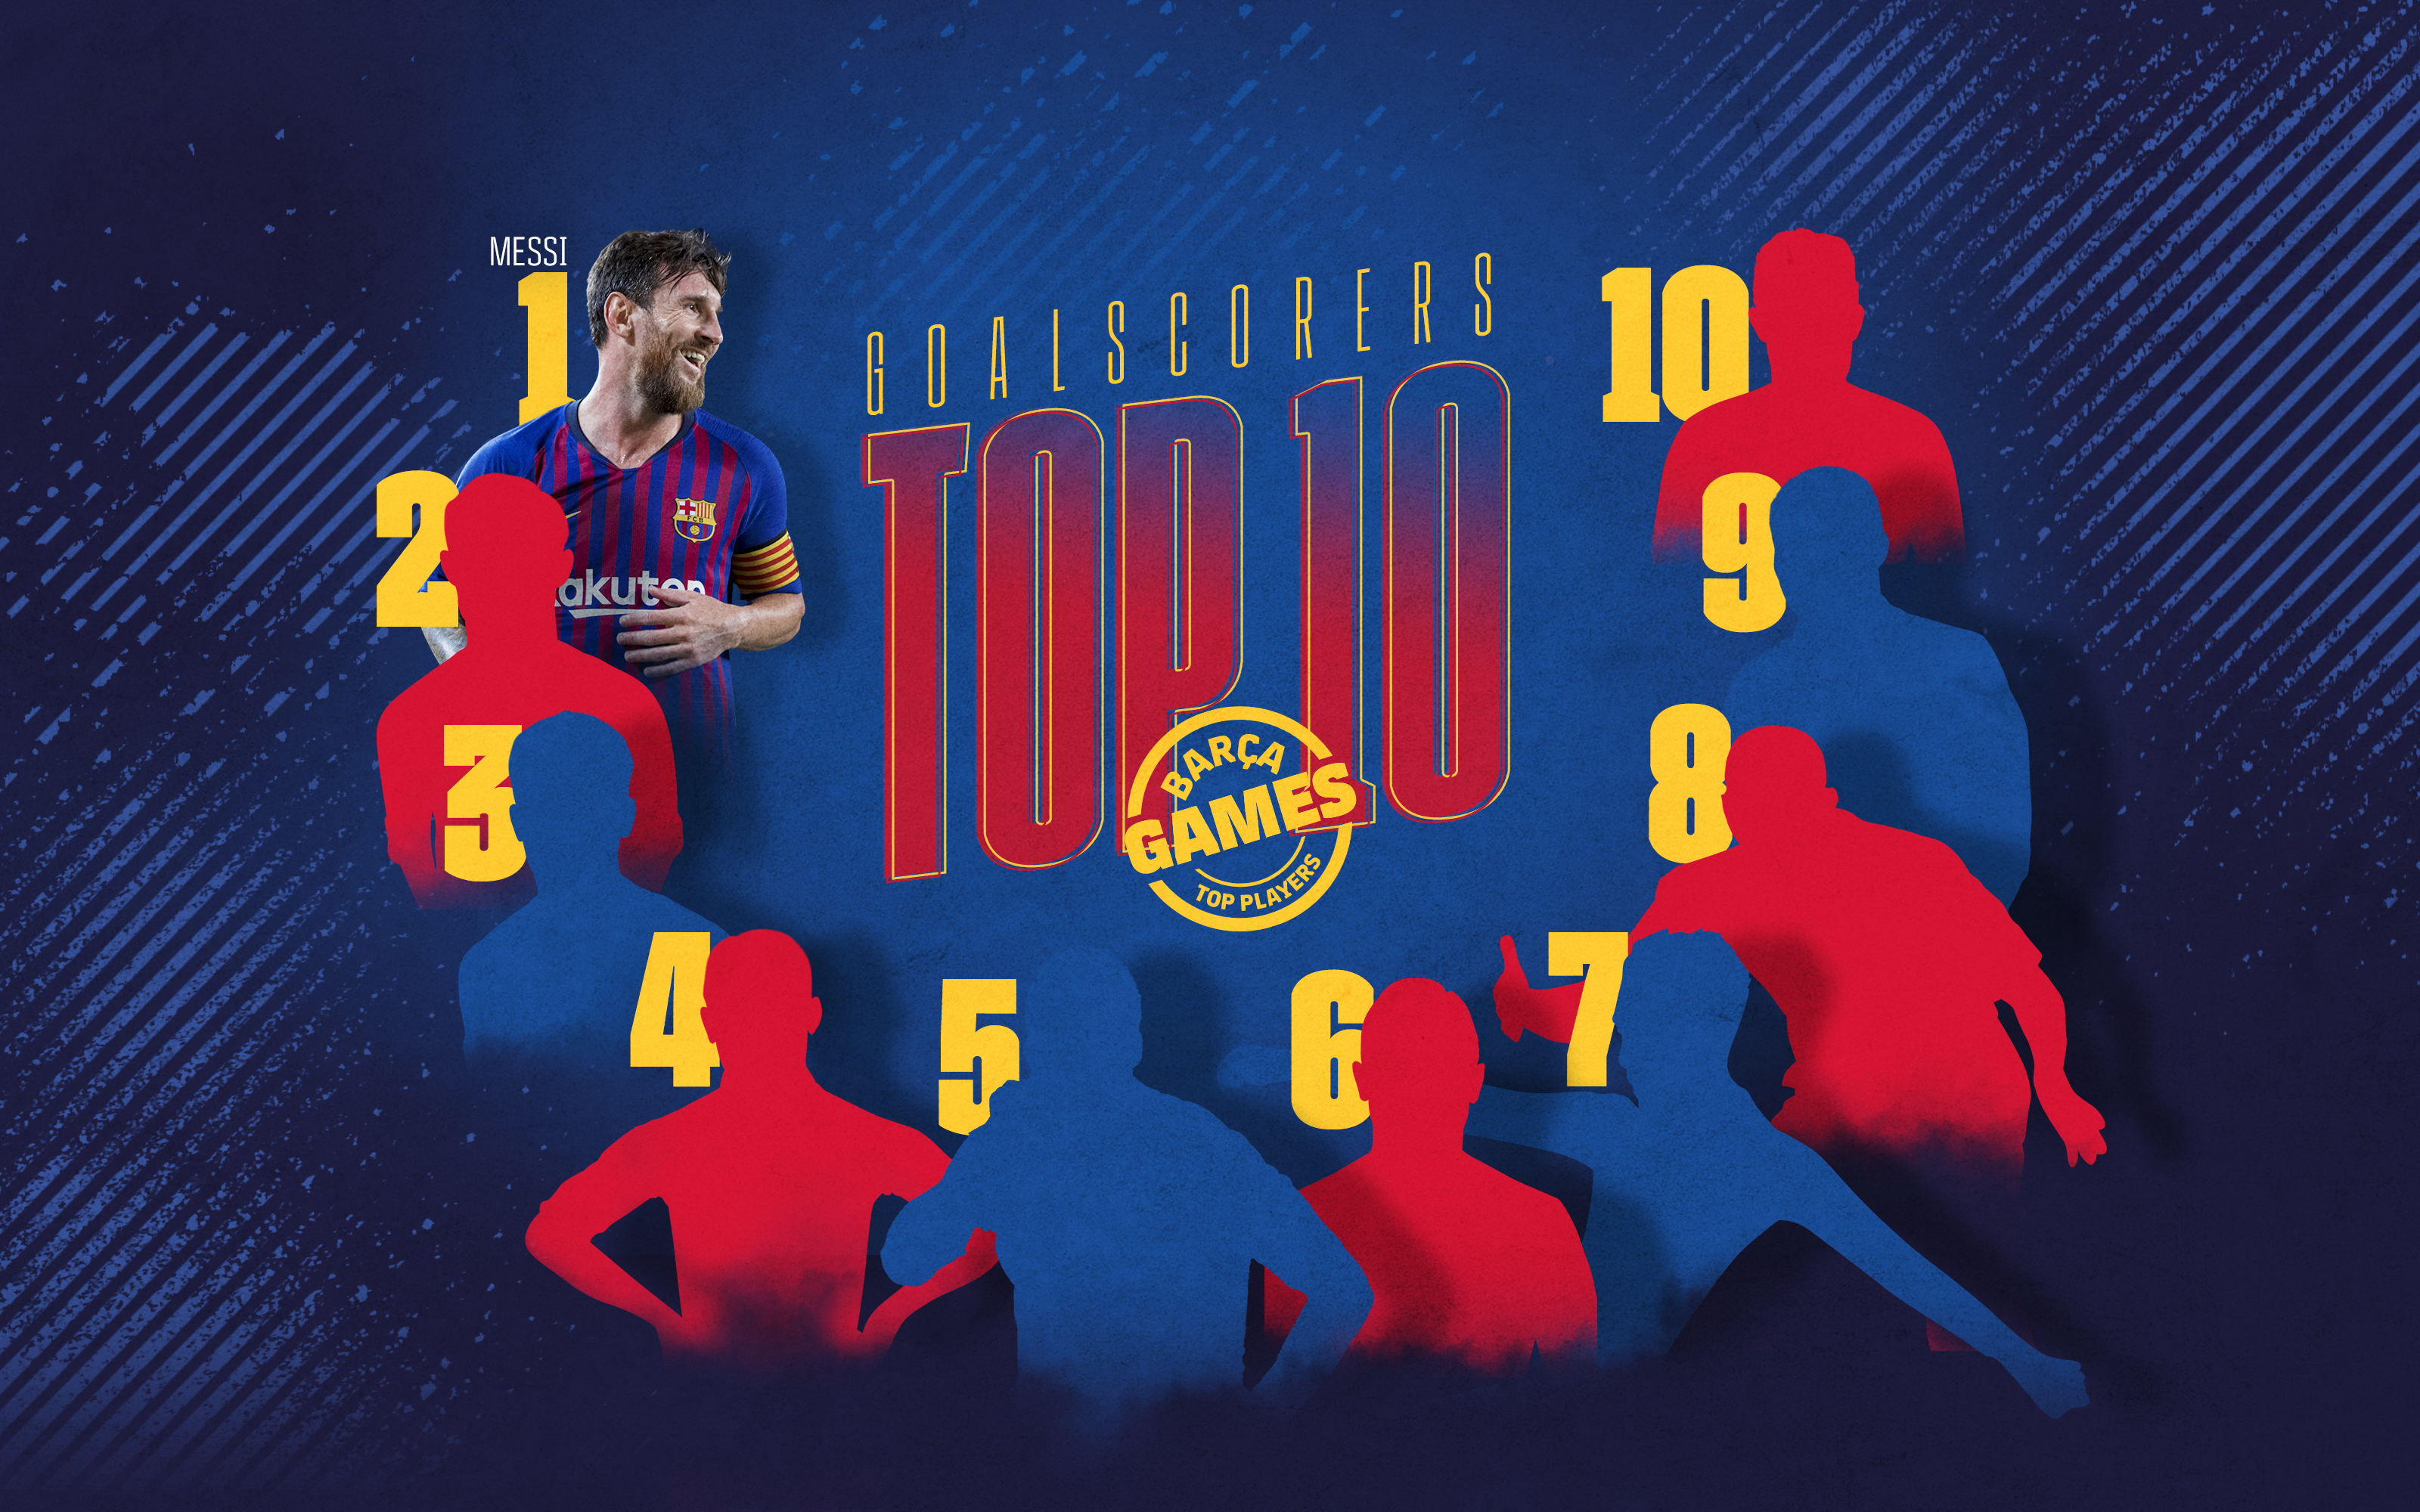 Can you Barça's all-time goal scorers in order?